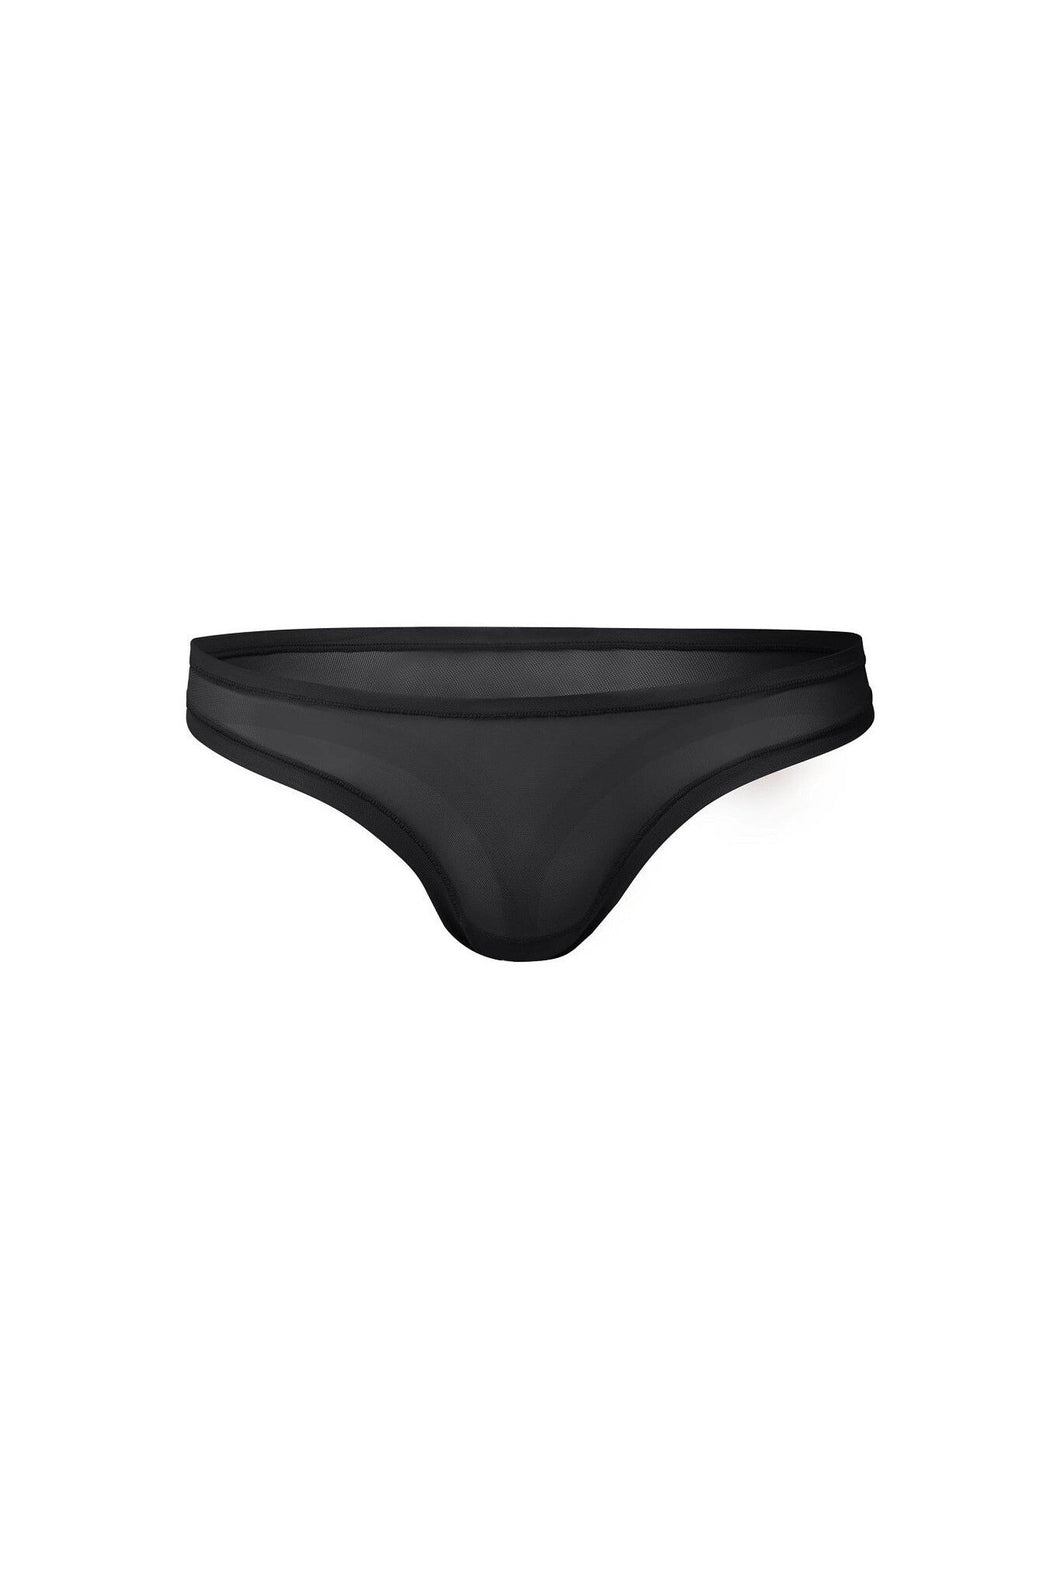 nueskin Bonnie in color Jet Black and shape thong